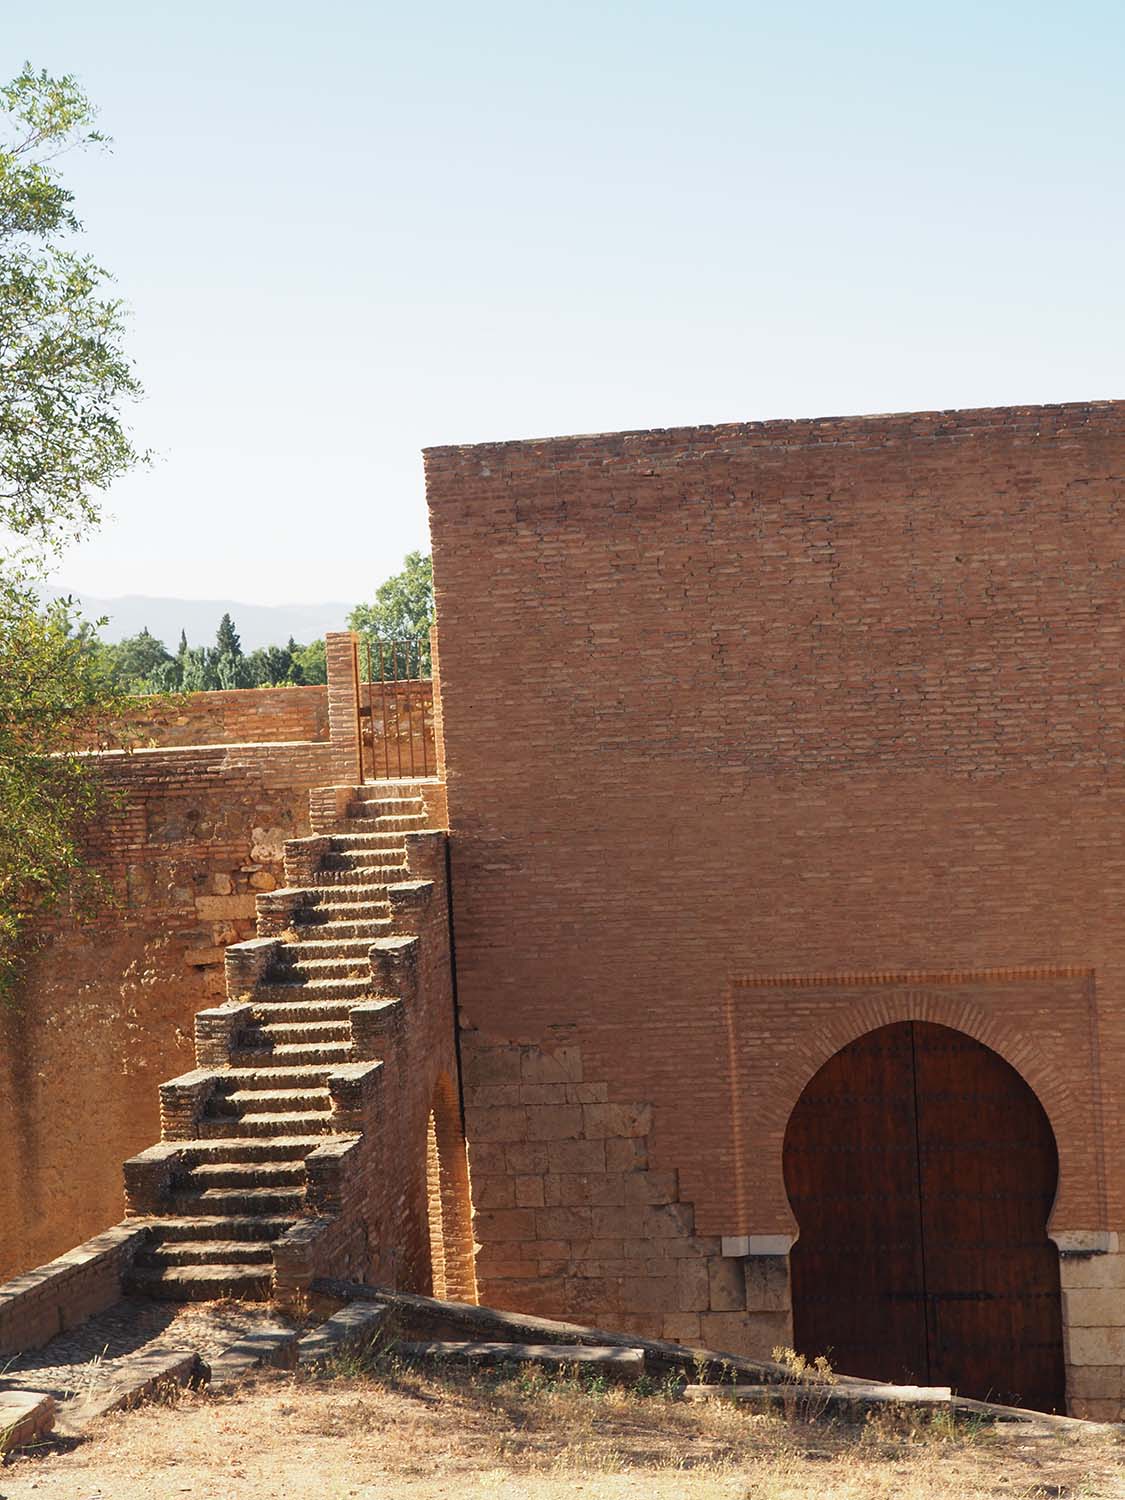 Alhambra Alta - Stairs to the southern Alhambra wall on the left; the Puerta de Siete Suelos on the right